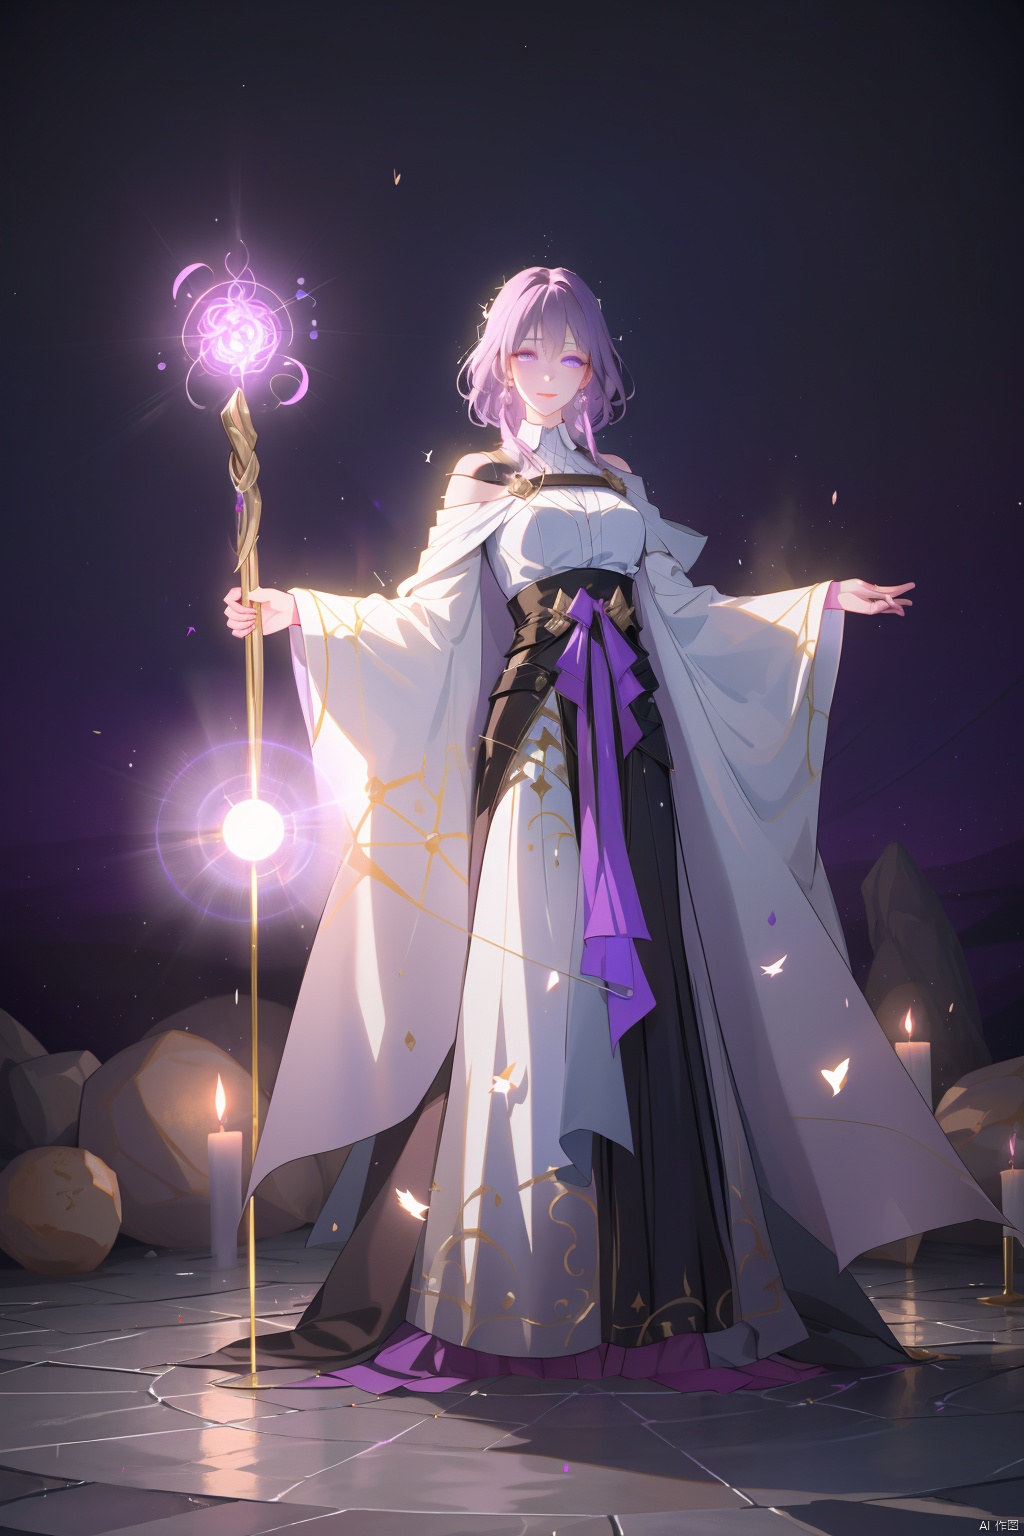  1 girl, sorceress apprentice, casting a powerful spell, wand in hand, glowing runes encircling her, cape fluttering in the magical breeze, standing in a mystic circle, surrounded by swirling potions and bubbling cauldrons, ancient tomes open nearby, eyes focused and determined, hint of mischief in her smile, purple aura shimmering around her, magical energy crackling in the air, mysterious symbols carved into the stone floor, dimly lit chamber with candles flickering, creating a dramatic and enchanting atmosphere.
, robinSR, 1girl